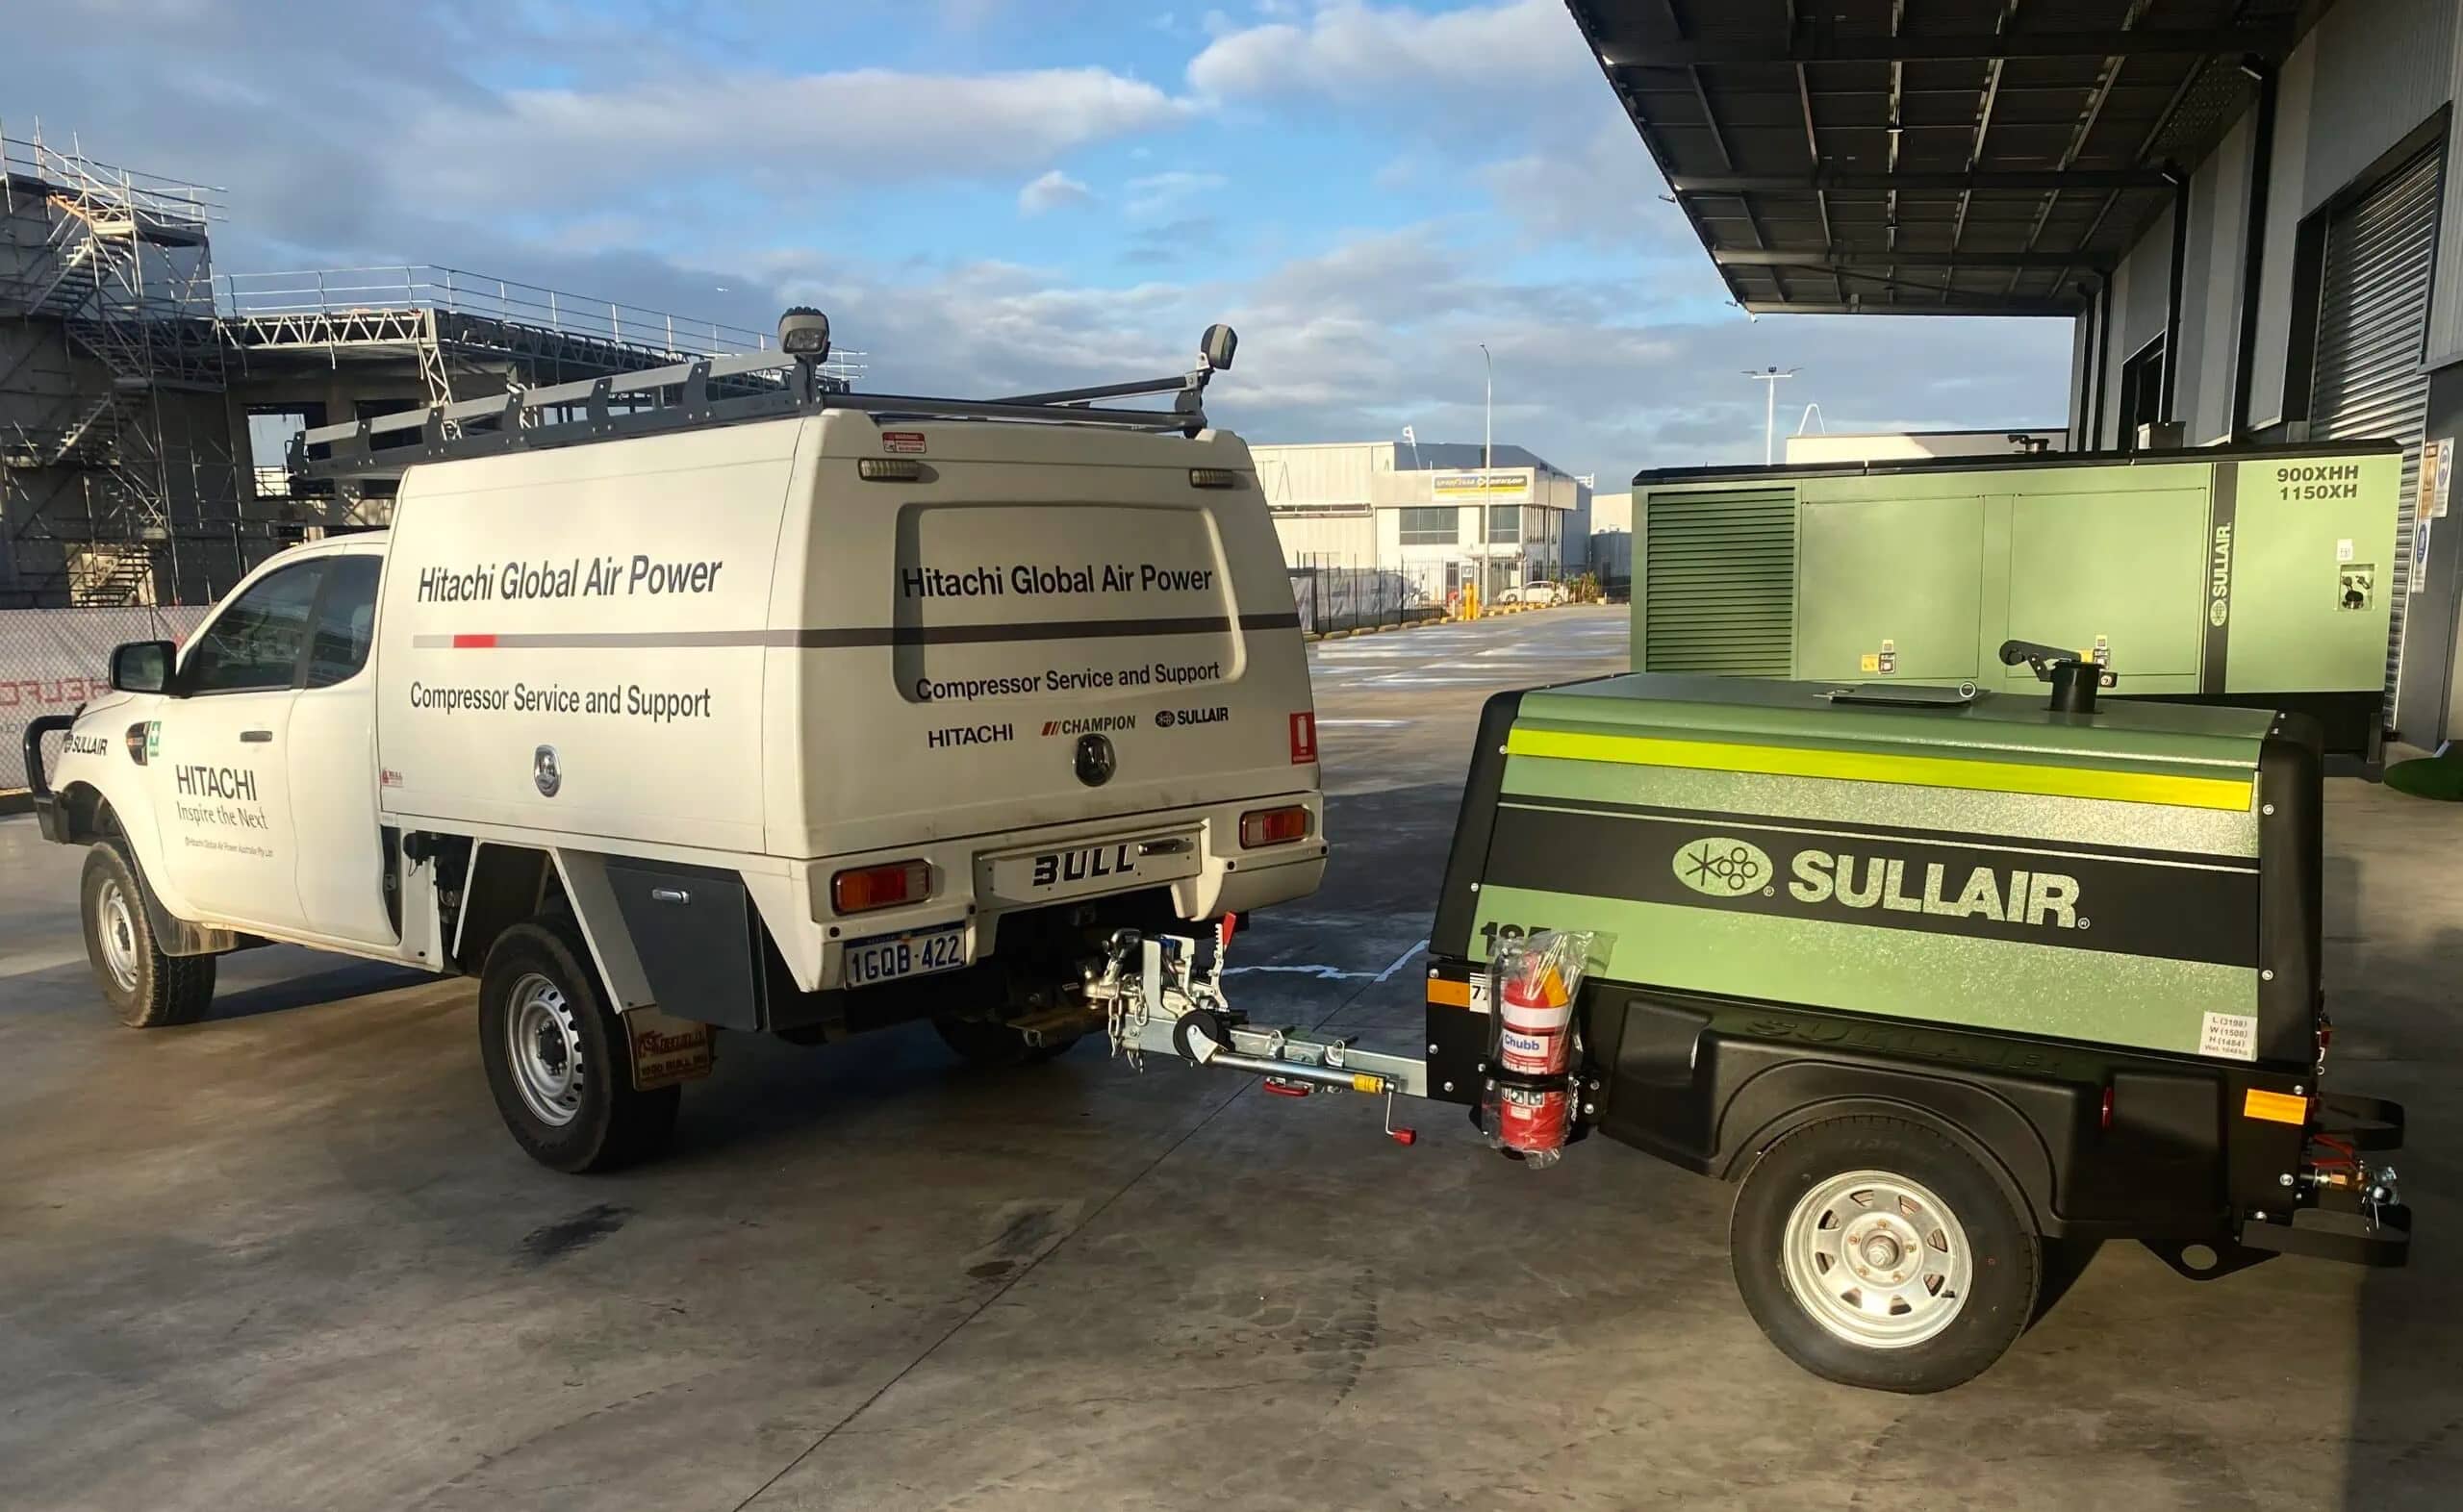 Road Vehicle Standards (RVS) laws from 1 July 2023 have set consistent, national road safety standards for all vehicles, including portable compressors.